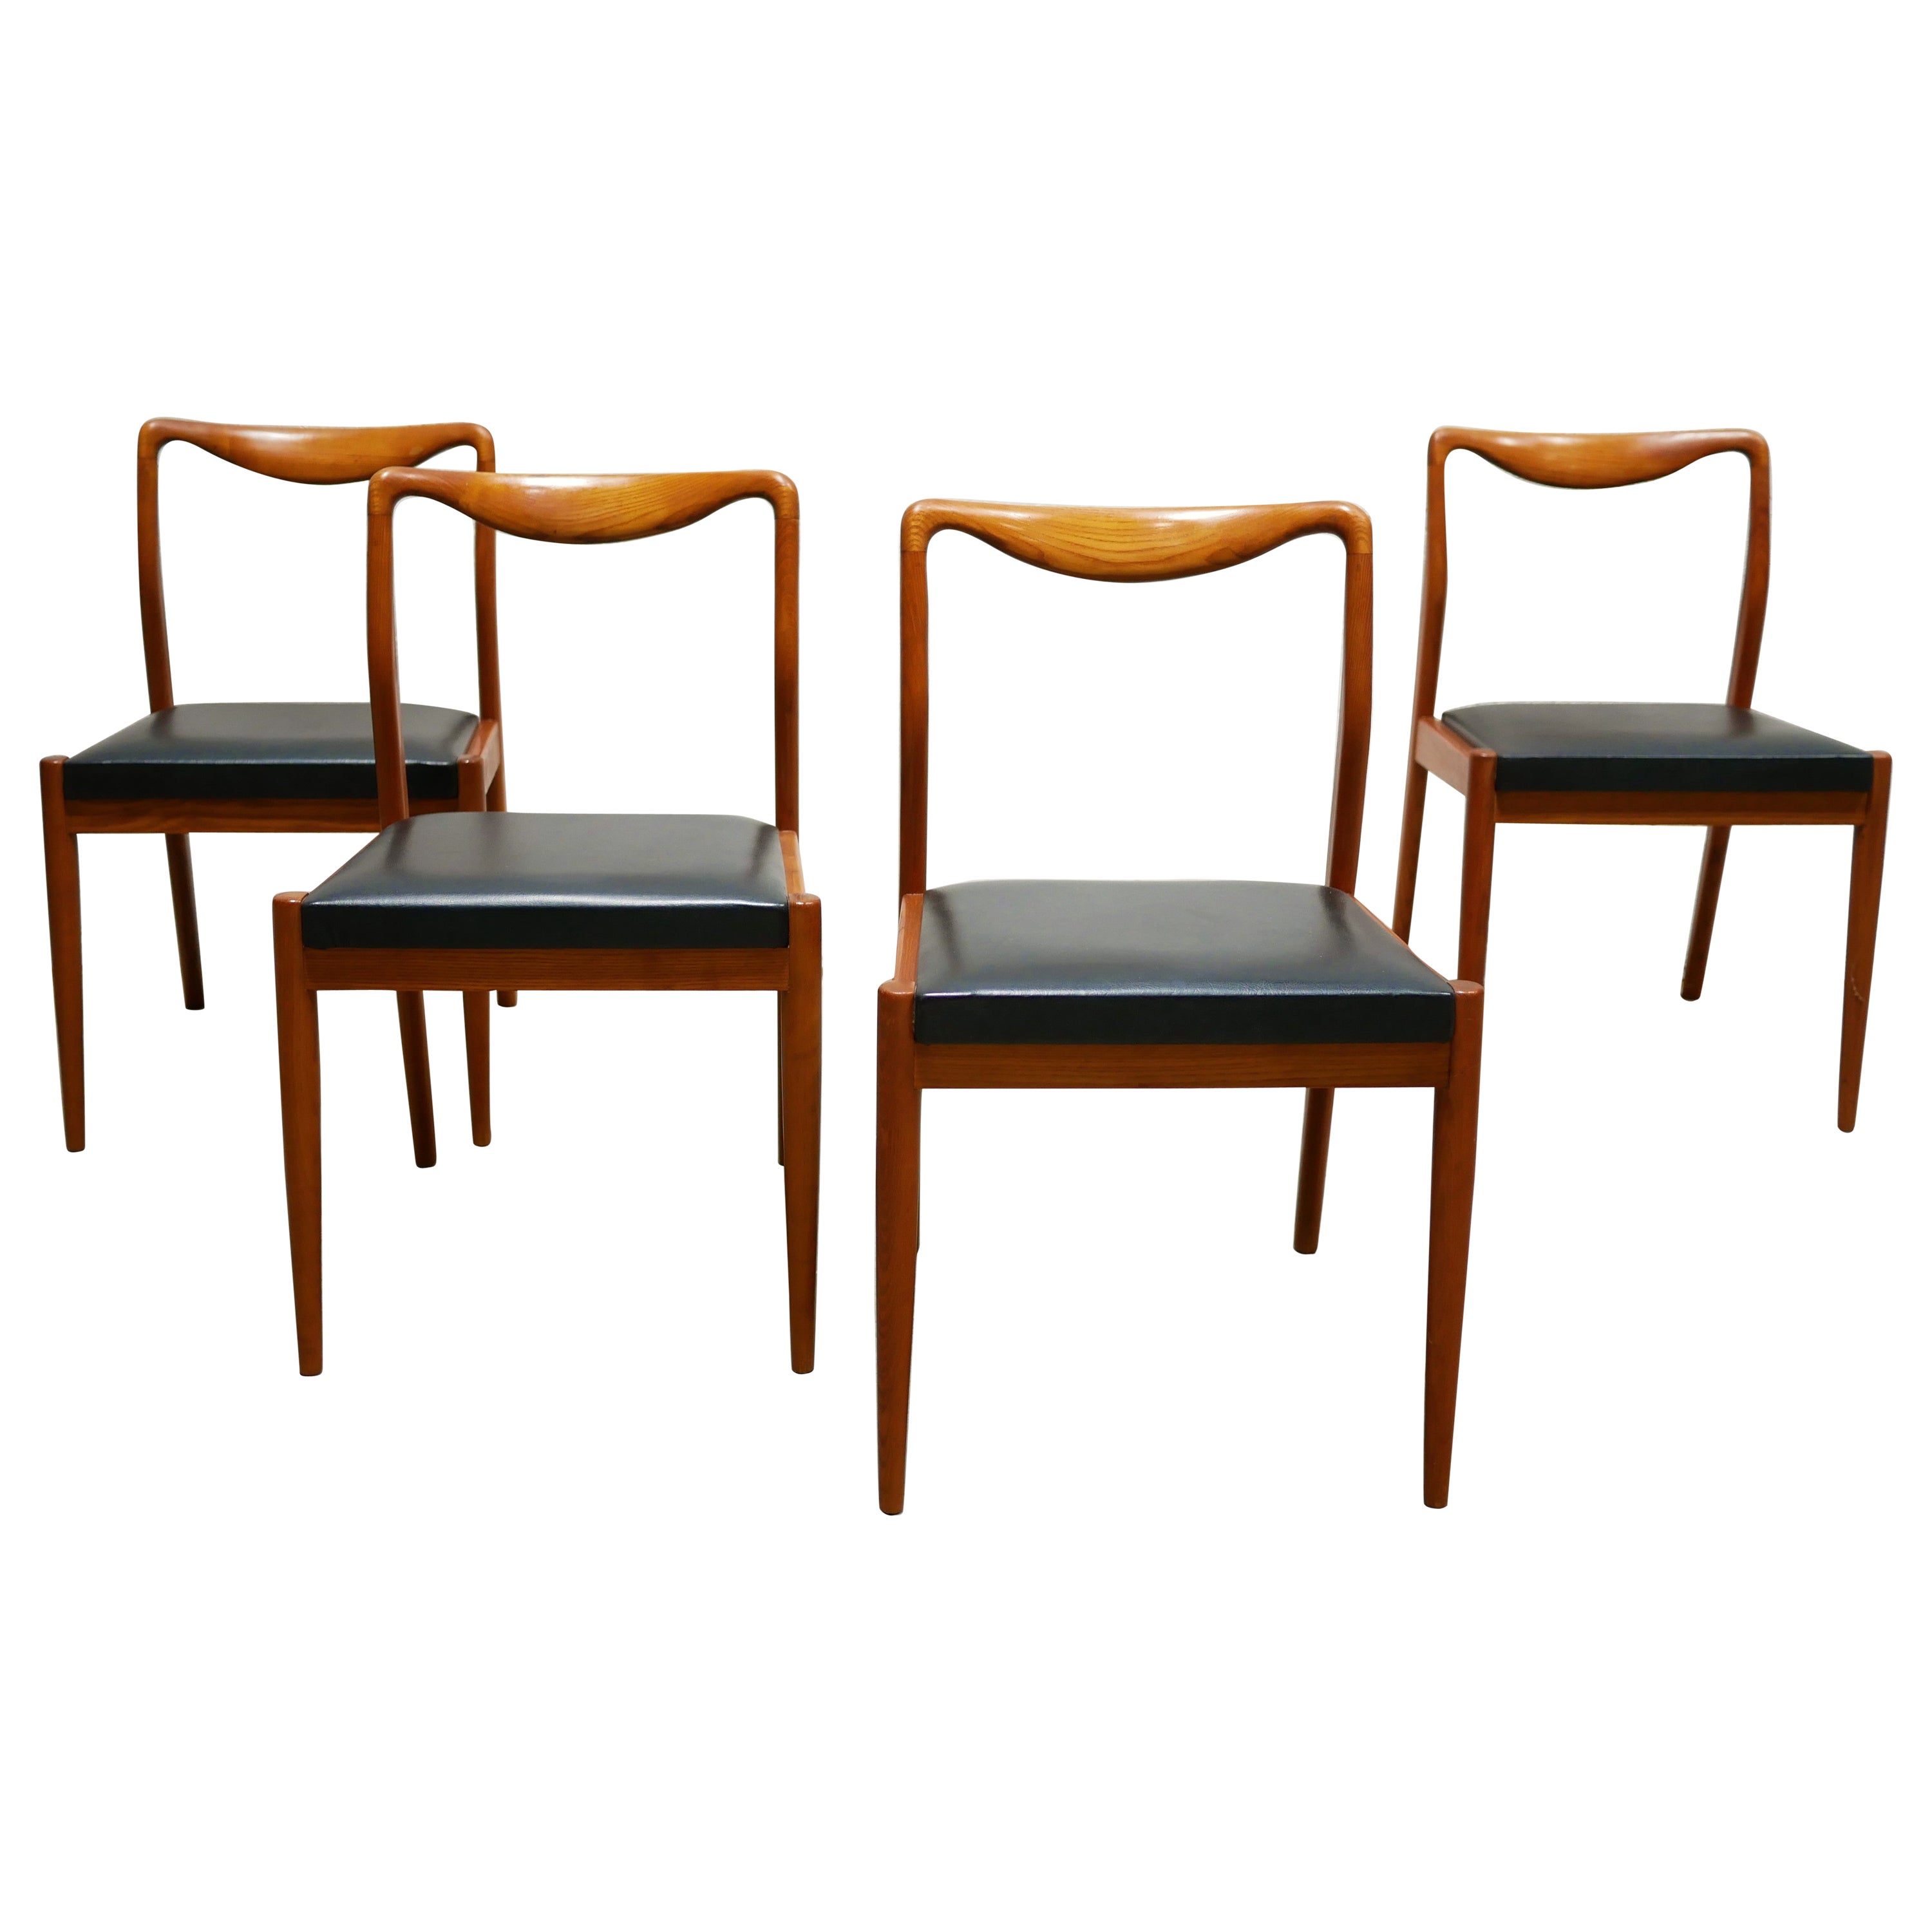 Series of 4 Vintage Scandinavian Chairs in Teak and Leatherette For Sale